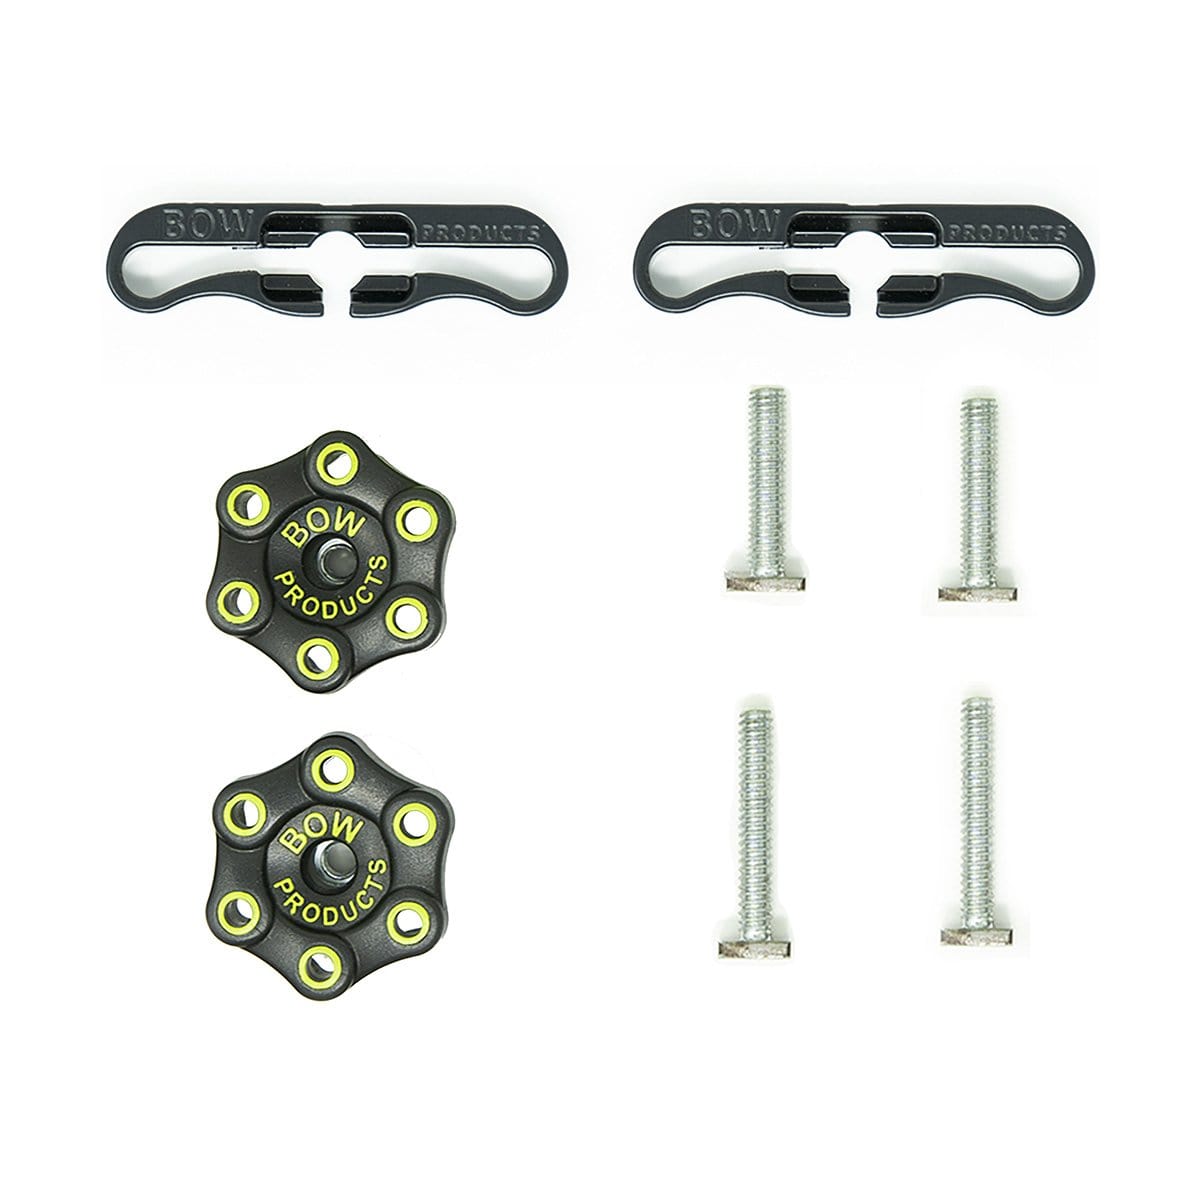 Bow Products AP4 Jigs and Fixtures AnchorPRO Short 5/8” Miter Bar Kit